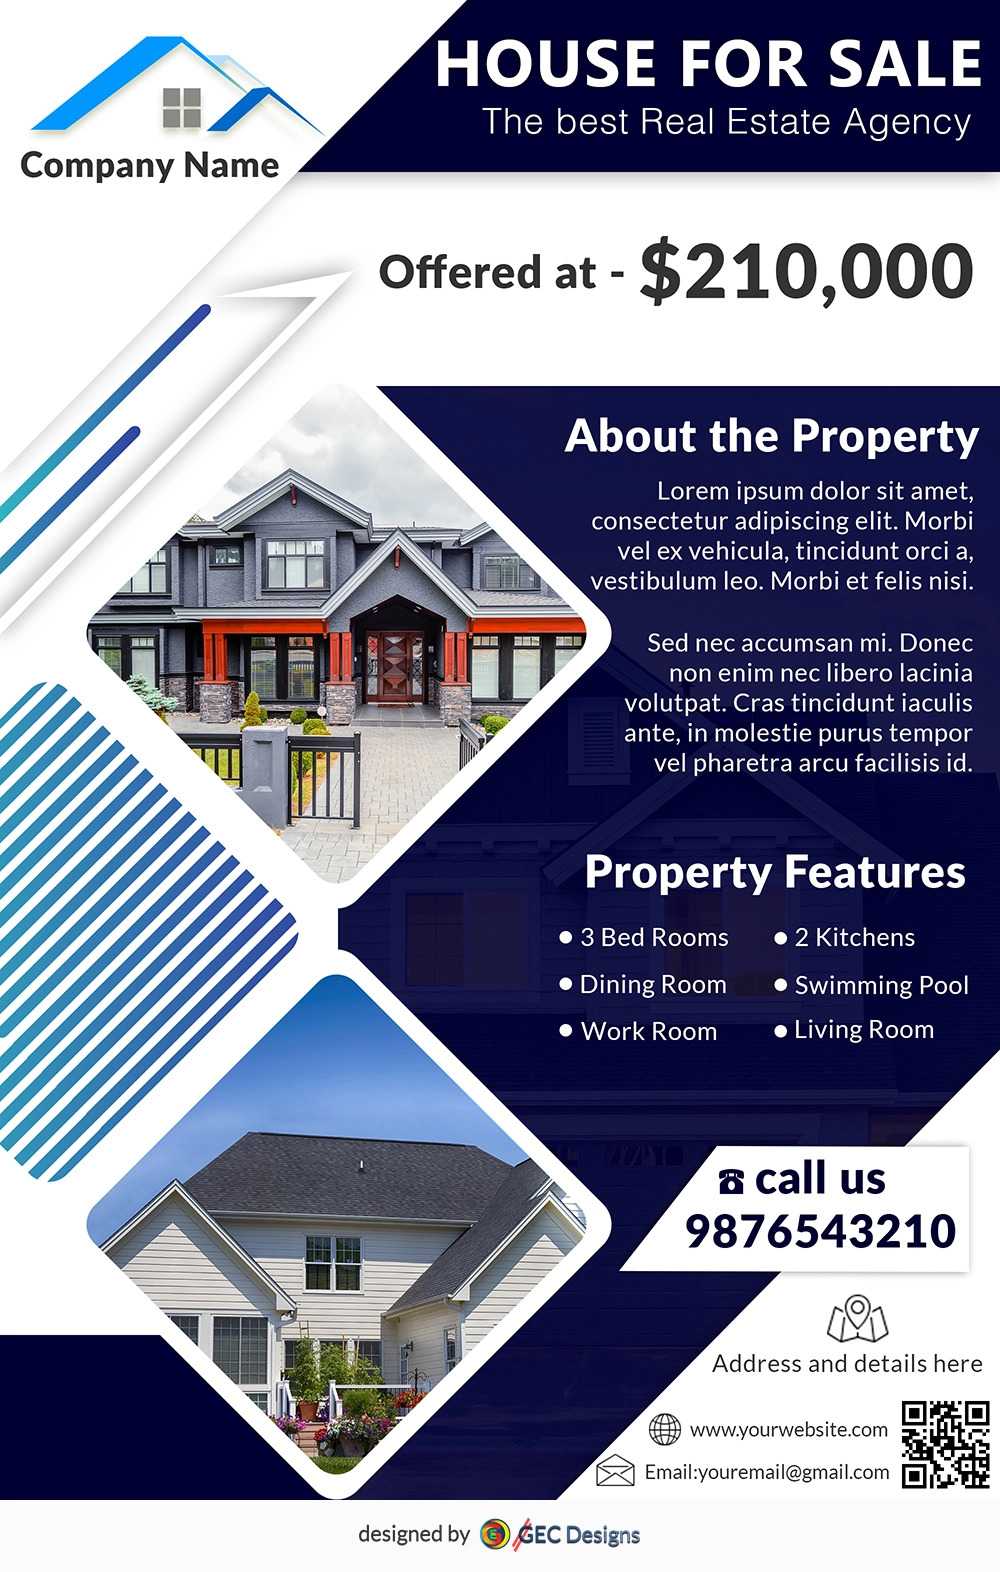 Download Free Property For Sale Real Estate Flyer Design For Free Home For Sale Flyer Template